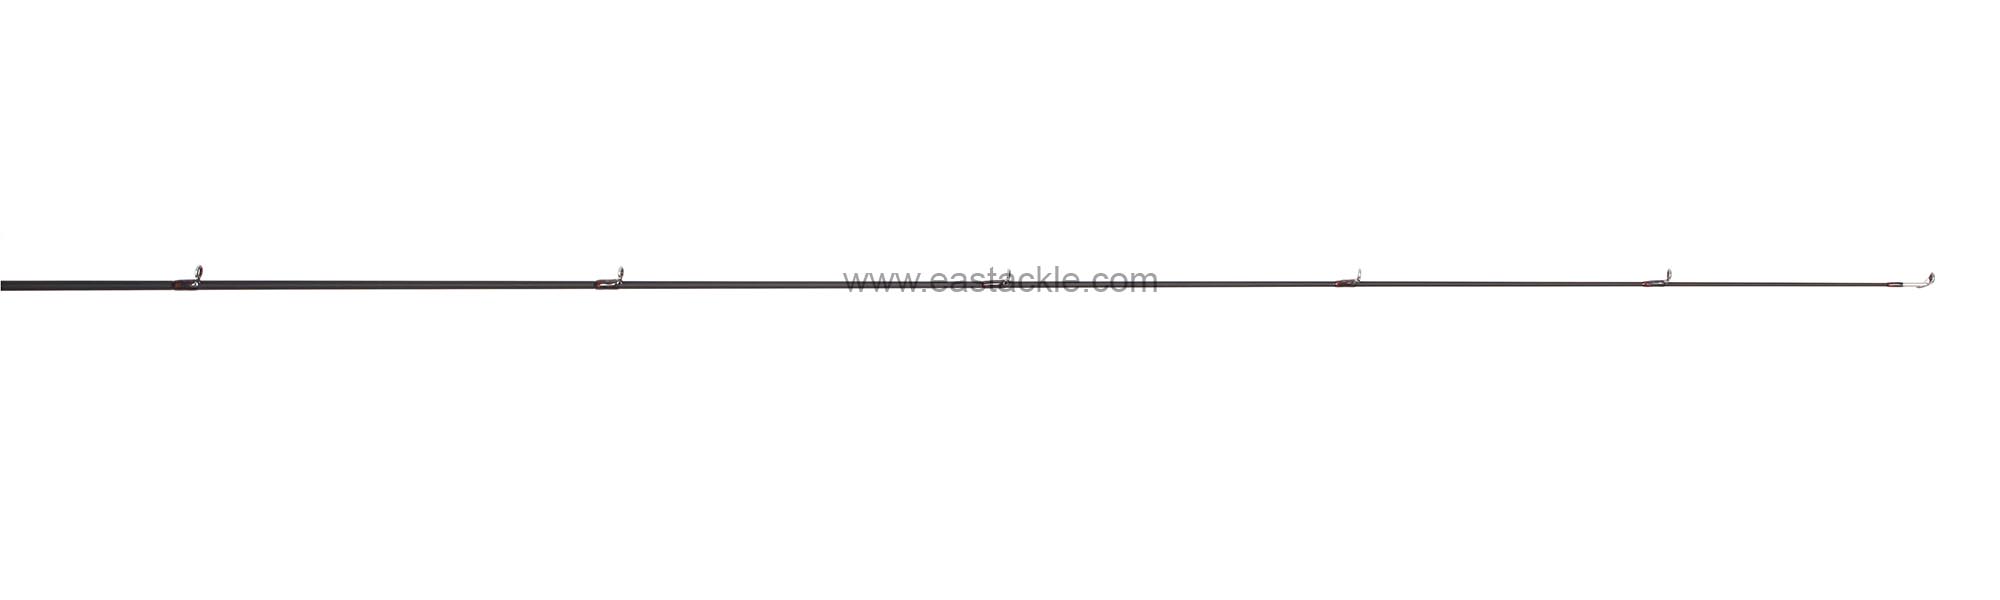 Storm - Teenie - TNC641UL - Bait Casting Rod - Tip Section (Side View) | Eastackle